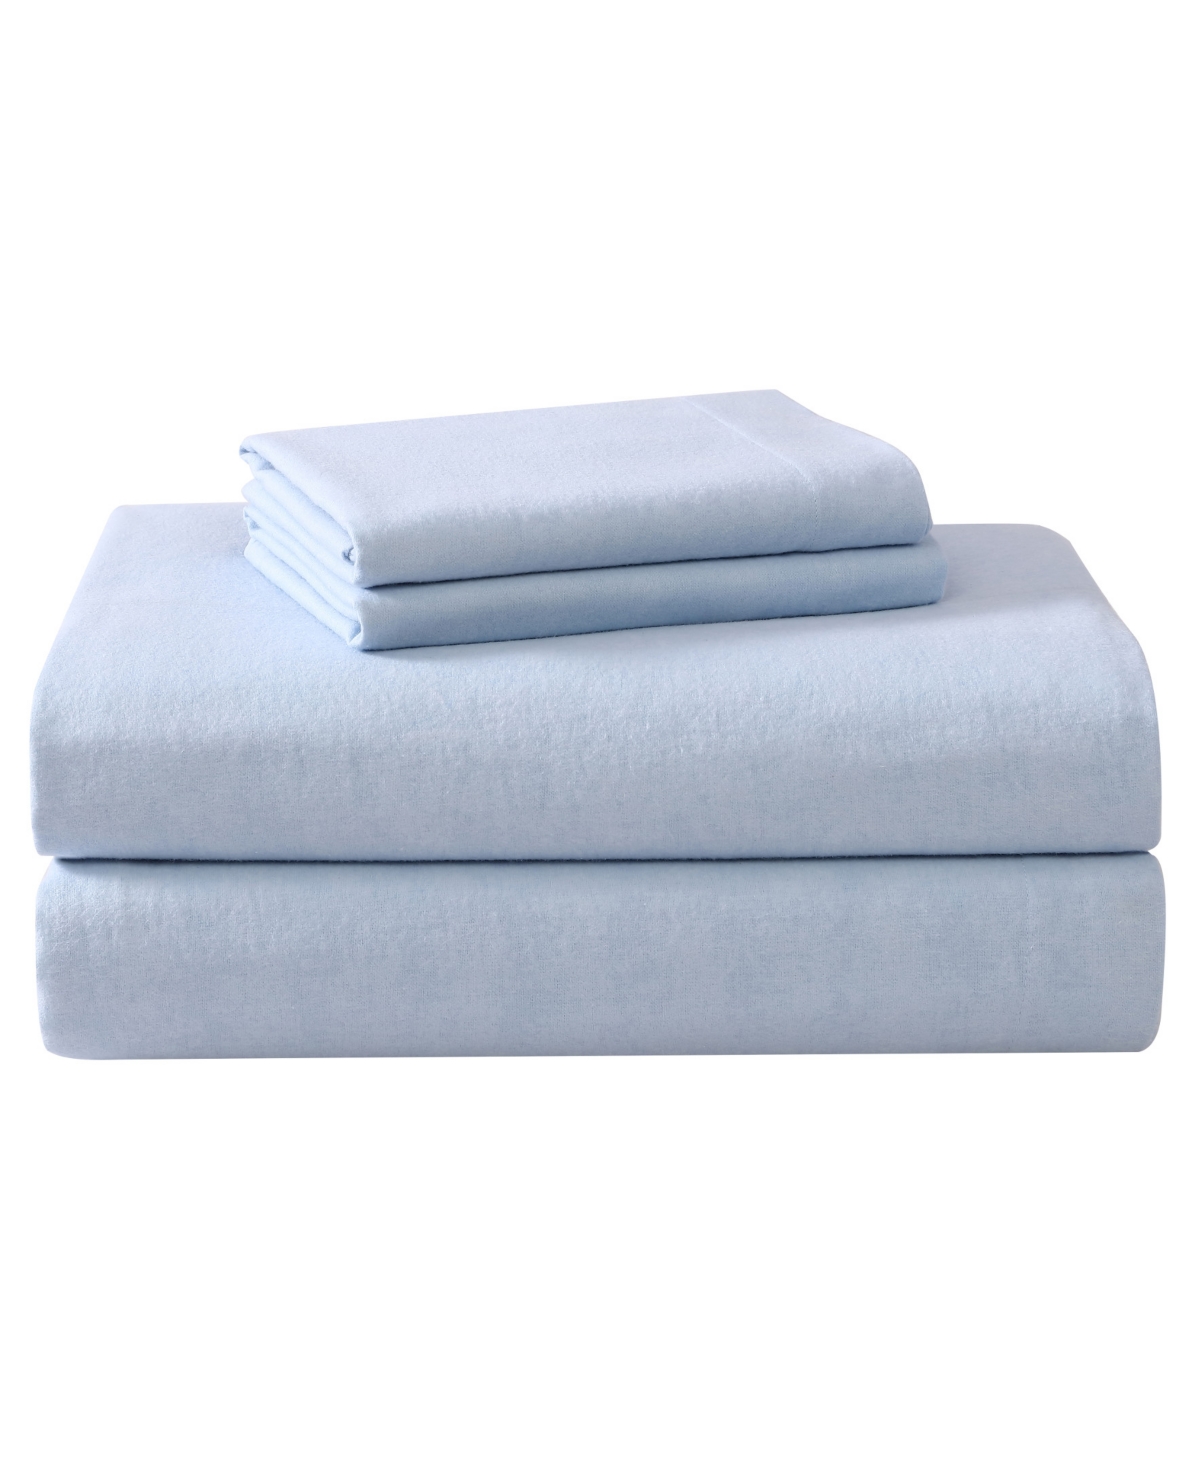 LAURA ASHLEY SOLID COTTON FLANNEL 4 PIECE SHEET SET, KING BEDDING